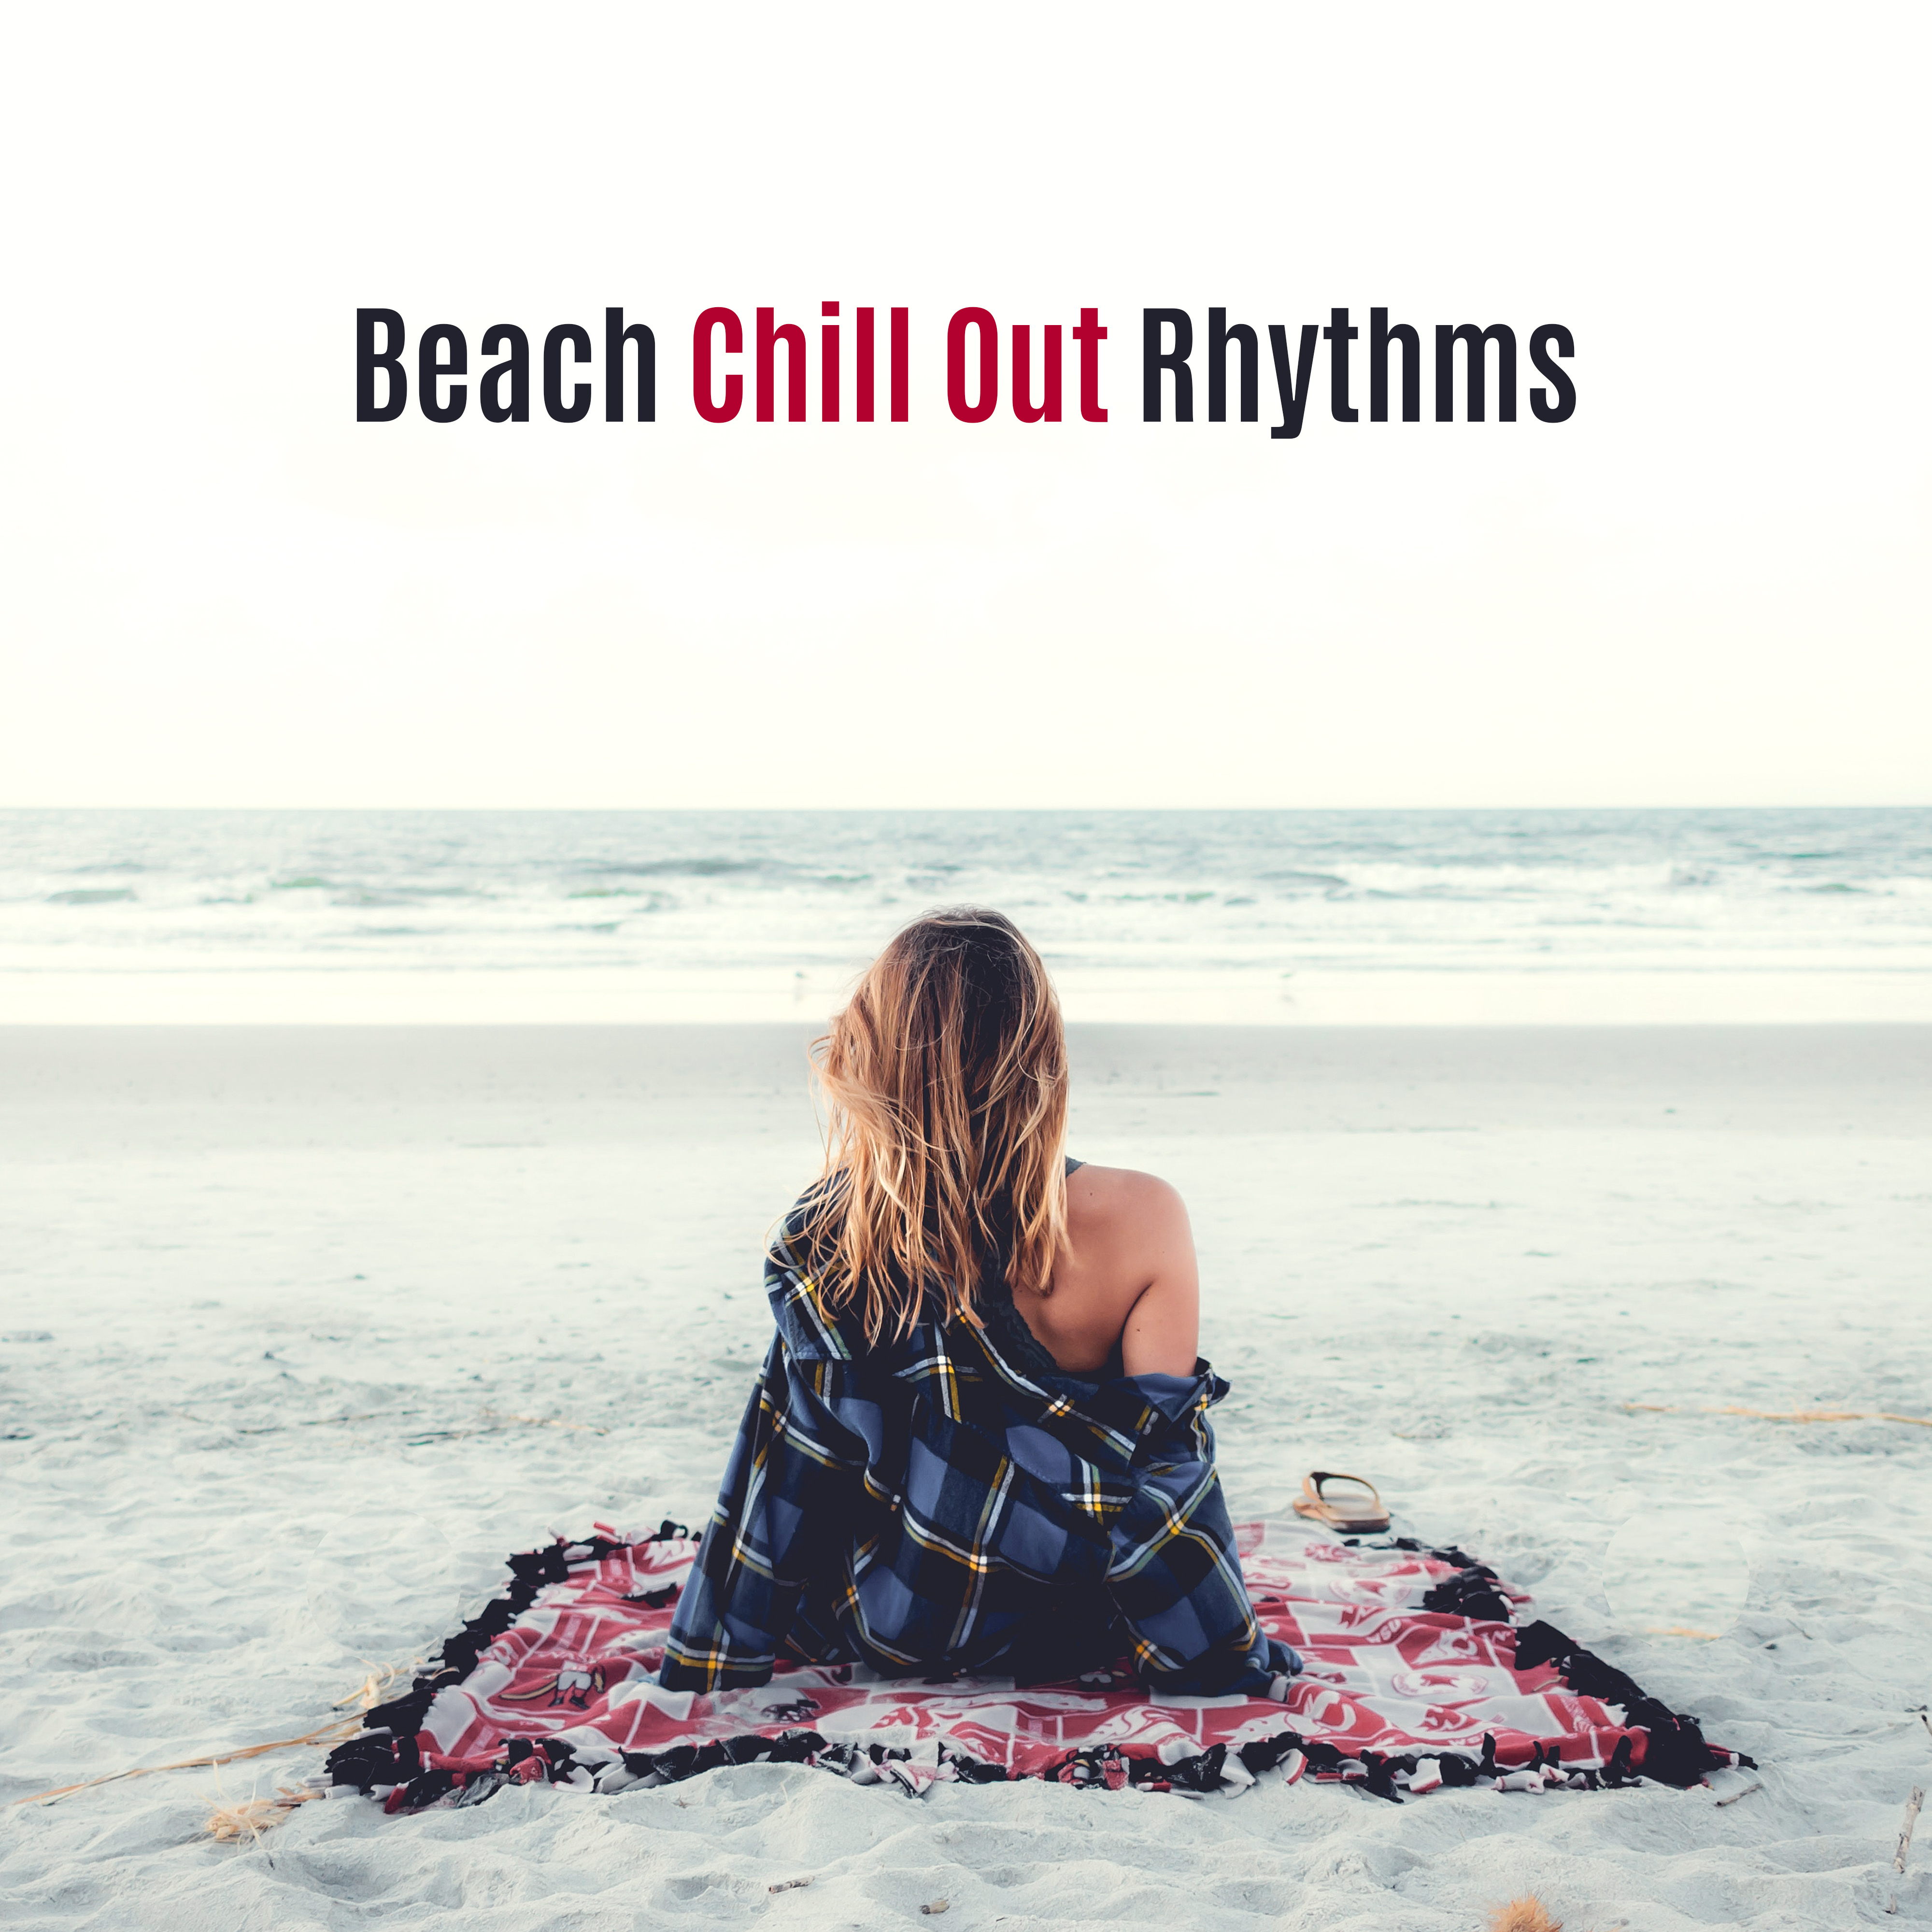 Beach Chill Out Rhythms – Summer Party 2017, Chill Out Beats, Music for Holiday, Cocktails & Drinks